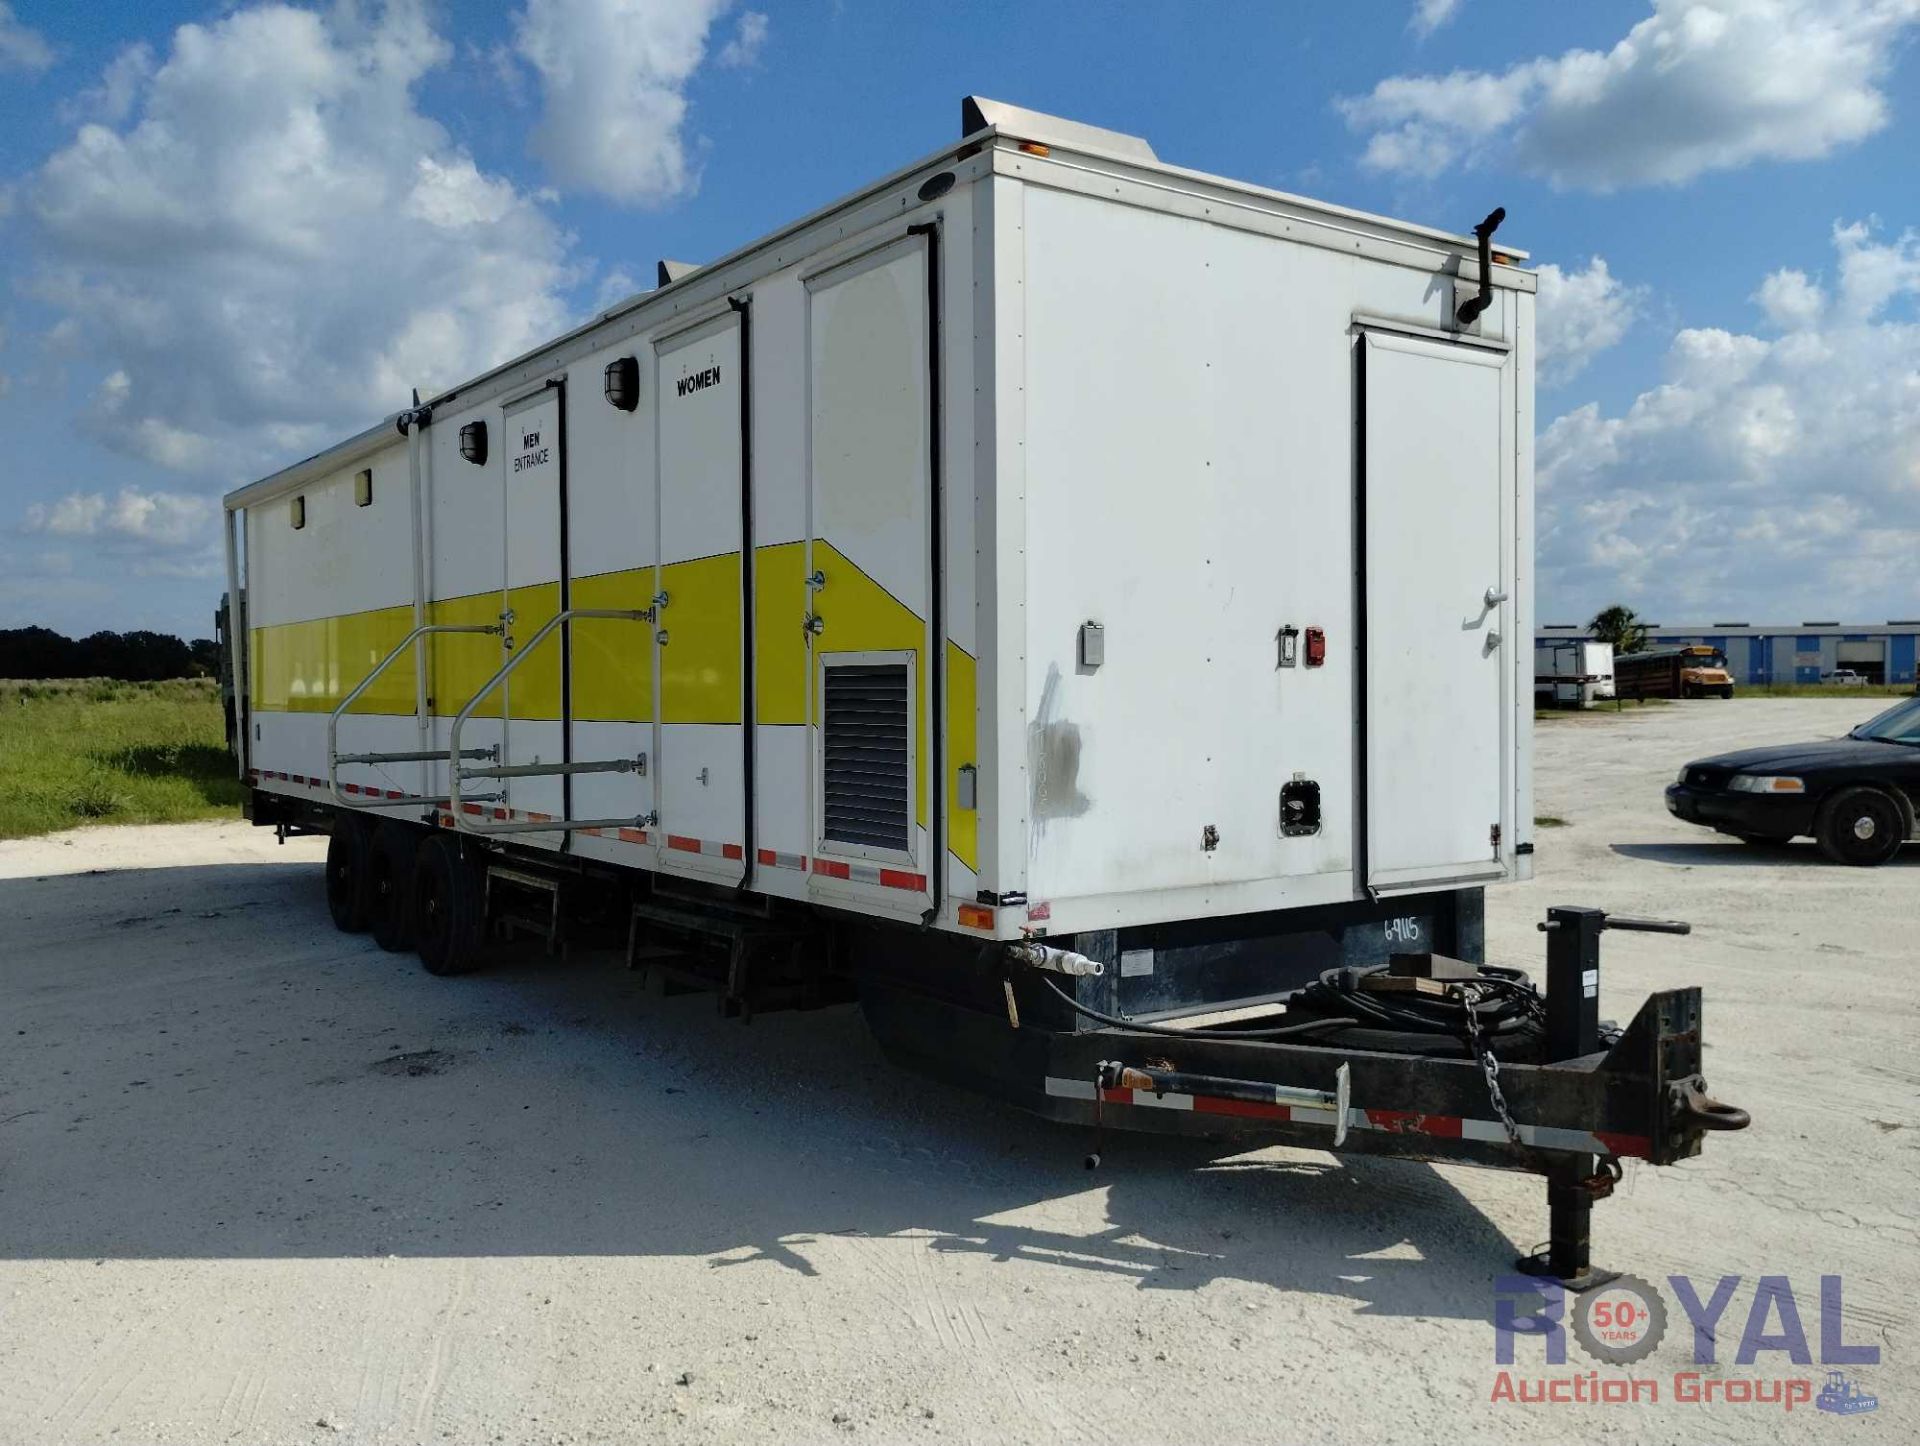 Fire/Rescue Portable Bathroom and Shower Trailer - Image 3 of 50